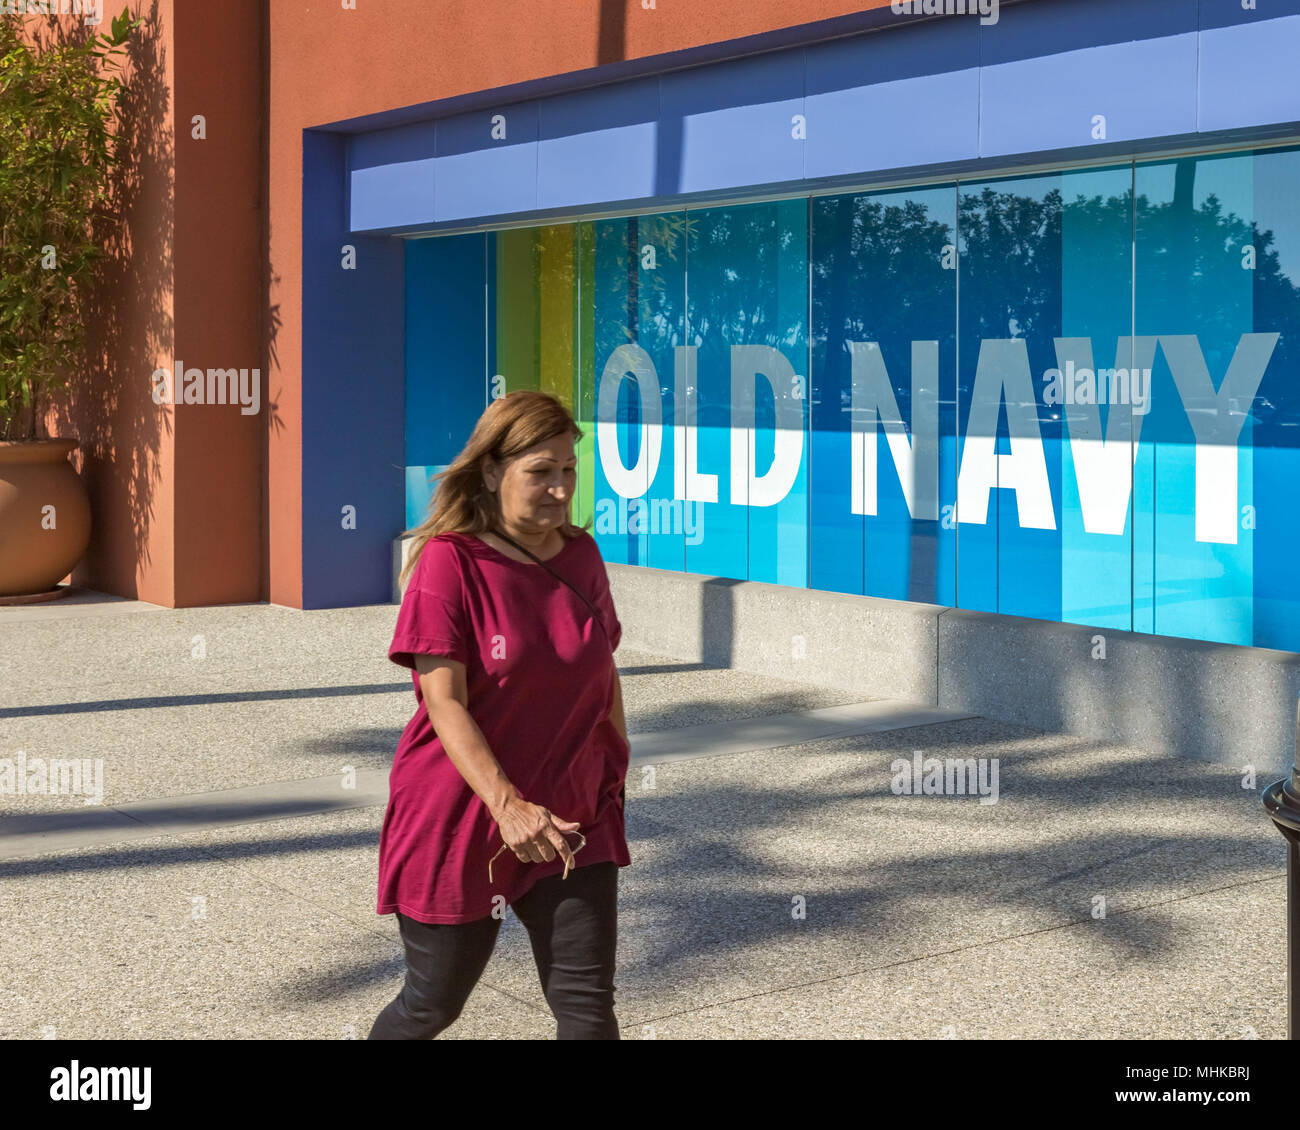 Irvine, California, USA. 26th Sep, 2017. Old Navy is an American clothing and accessories retailing company owned by American multinational corporation Gap Inc. It has corporate operations in the Mission Bay neighborhood of San Francisco. The largest of the Old Navy stores are its flagship stores, located in New York City, the Mall of America, Seattle, Chicago, and San Francisco. Credit: Alexey Bychkov/ZUMA Wire/Alamy Live News Stock Photo